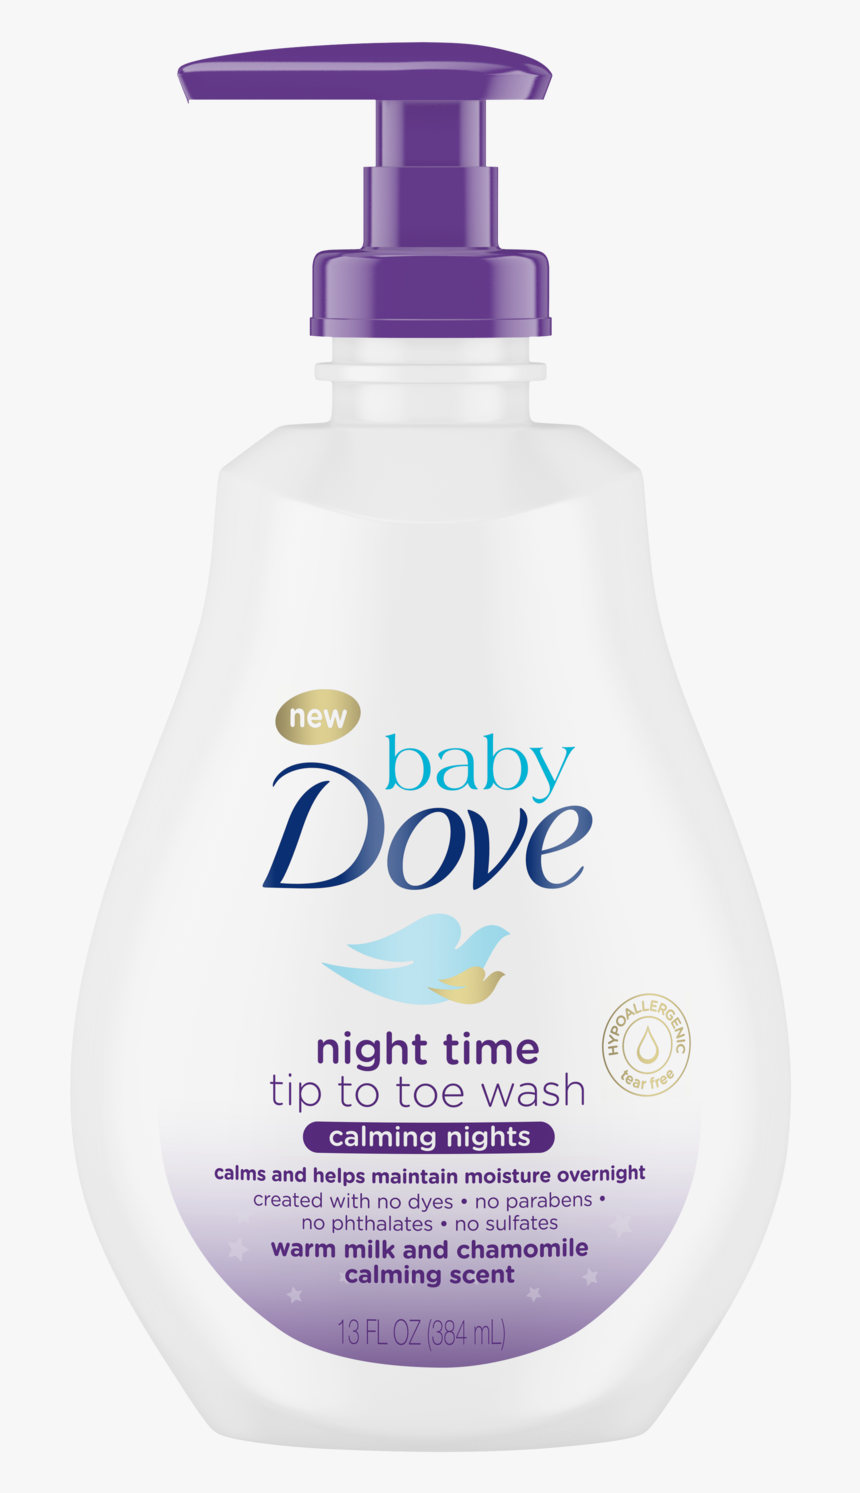 Baby Dove Calming Nights Tip To Toe Wash 13 Oz - Baby Dove Night Time, HD Png Download, Free Download